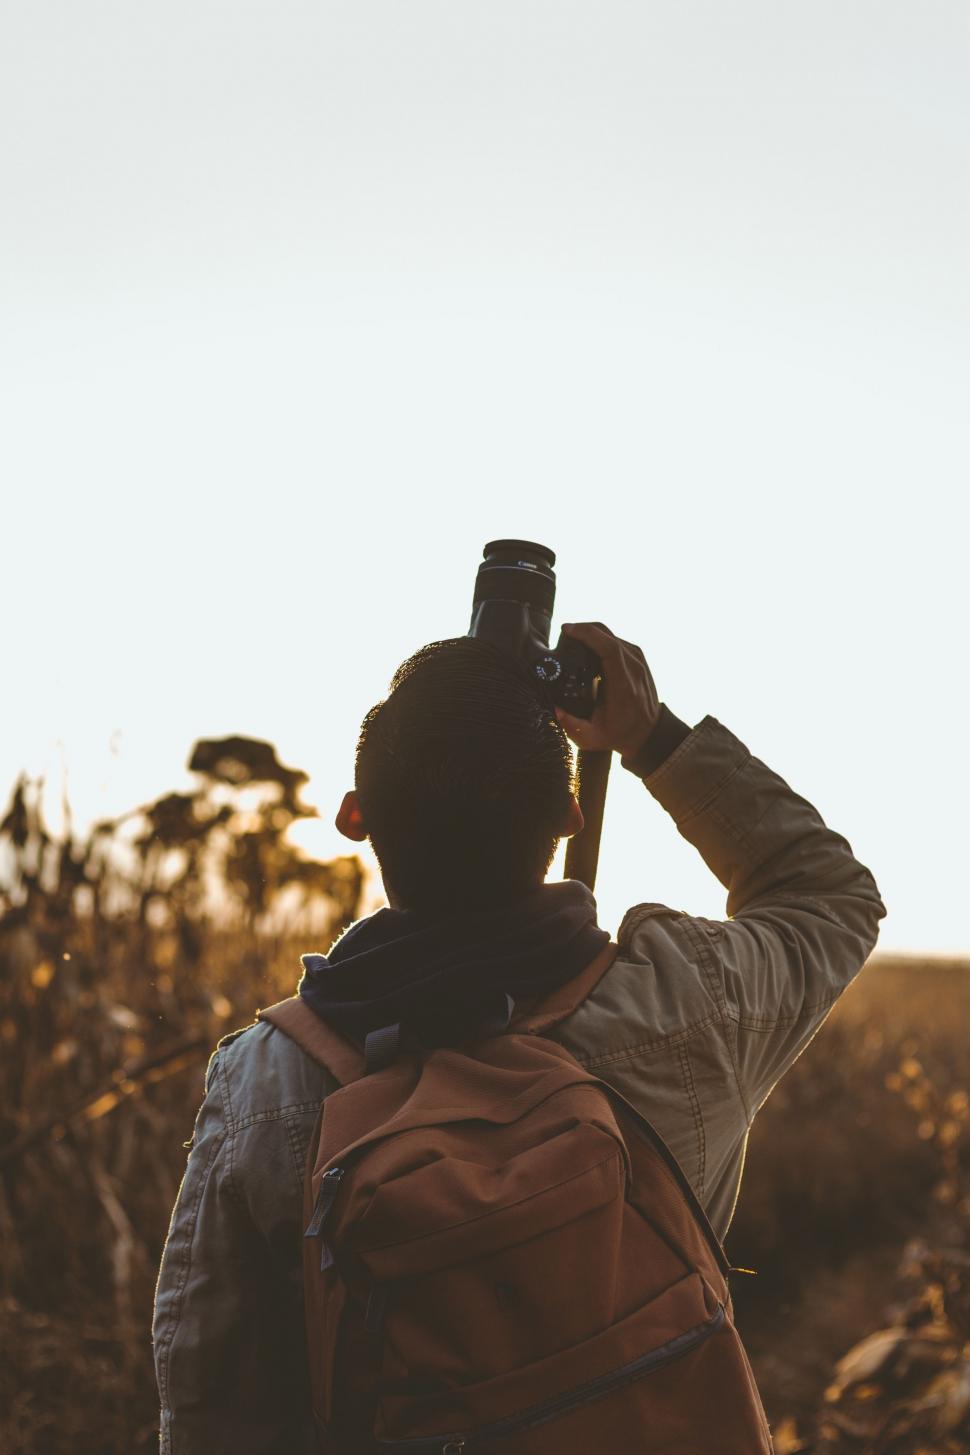 Free Image of Man Taking a Picture With a Camera 